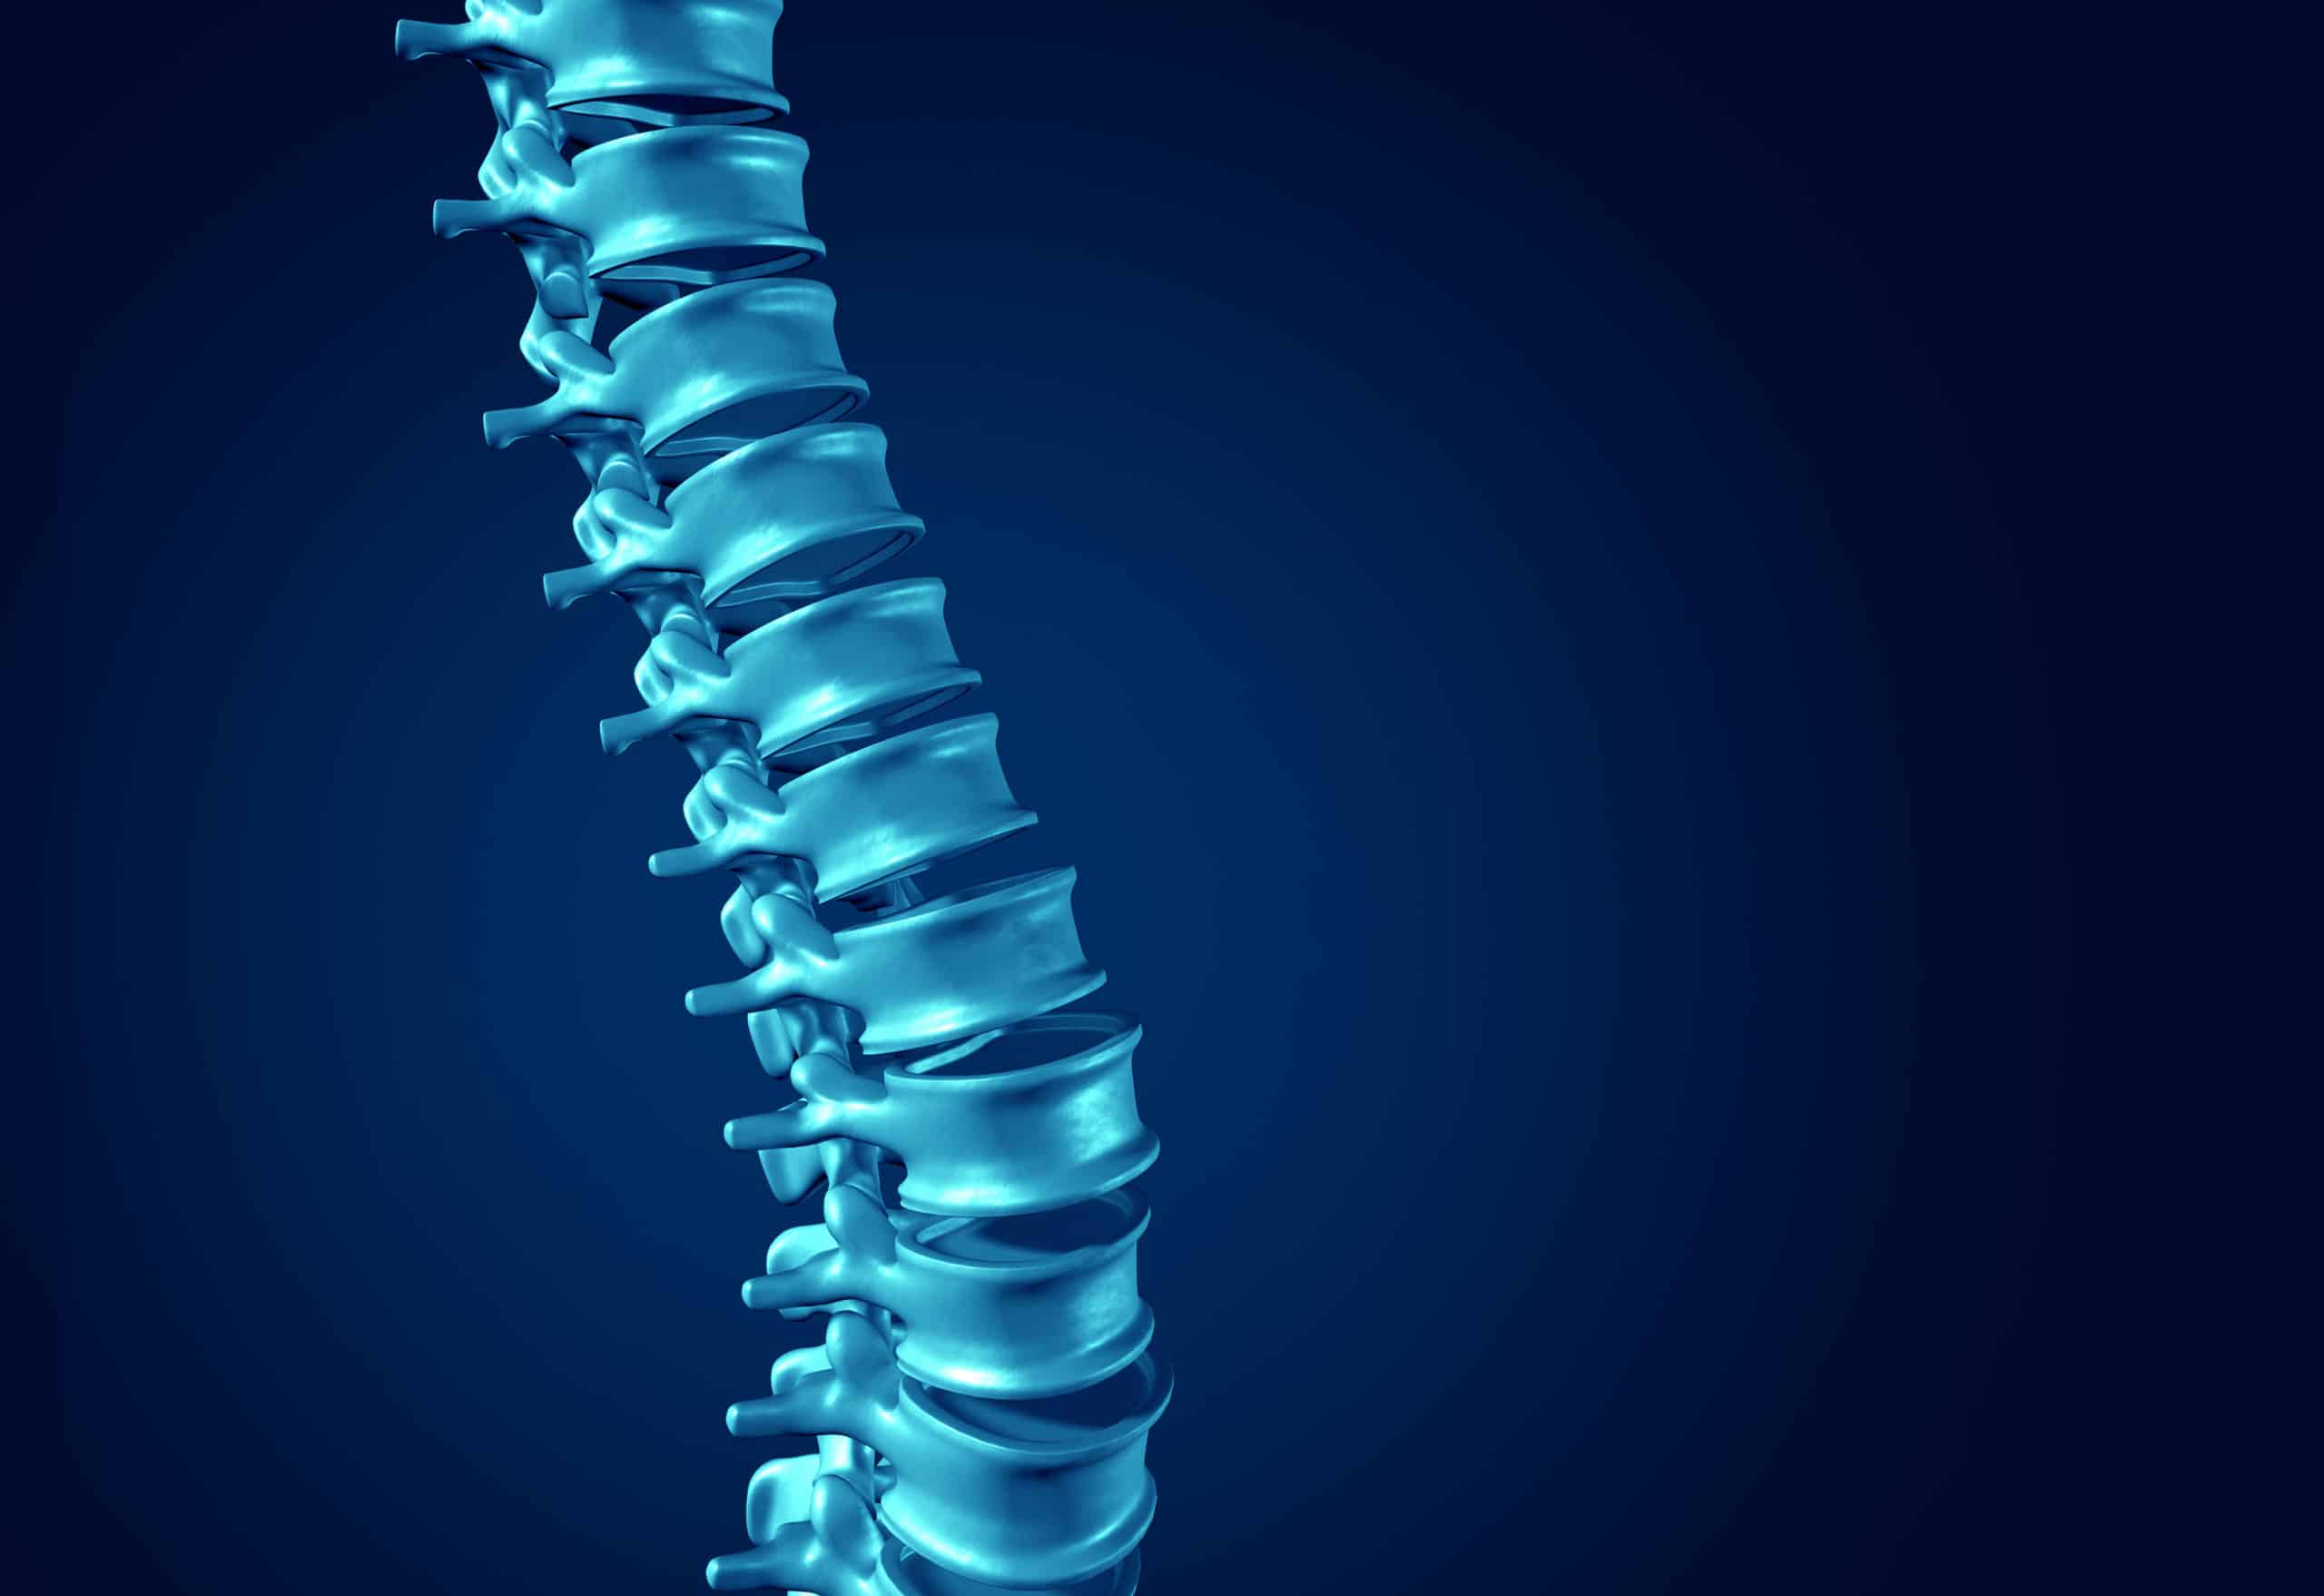 Mayo Clinic Q&A: Many factors can raise risk of osteoporosis